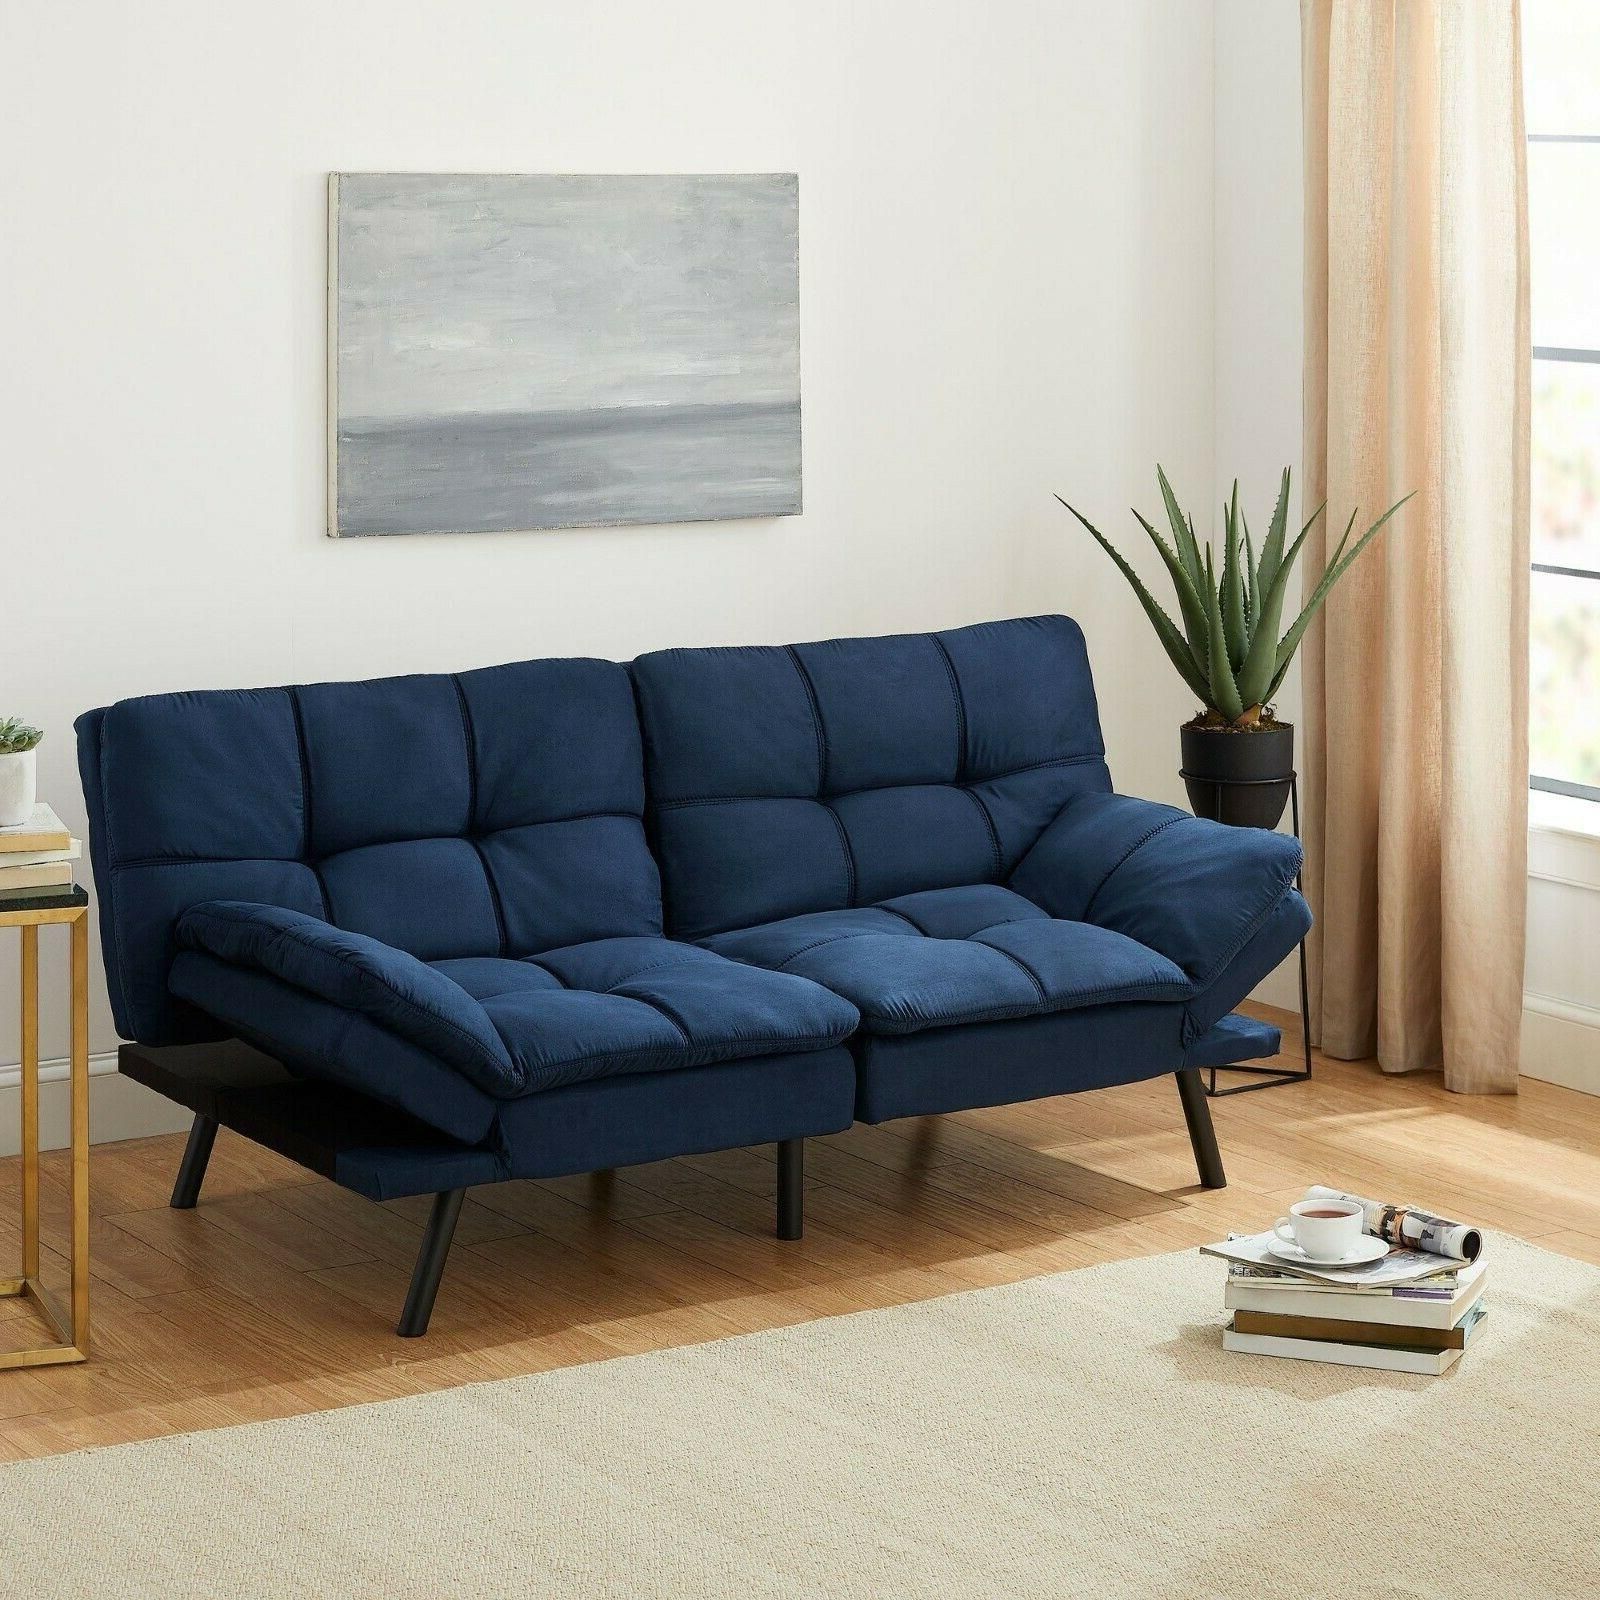 New – Mainstays Memory Foam Futon, Gray Faux With Regard To Black Faux Suede Memory Foam Sofas (Gallery 13 of 20)